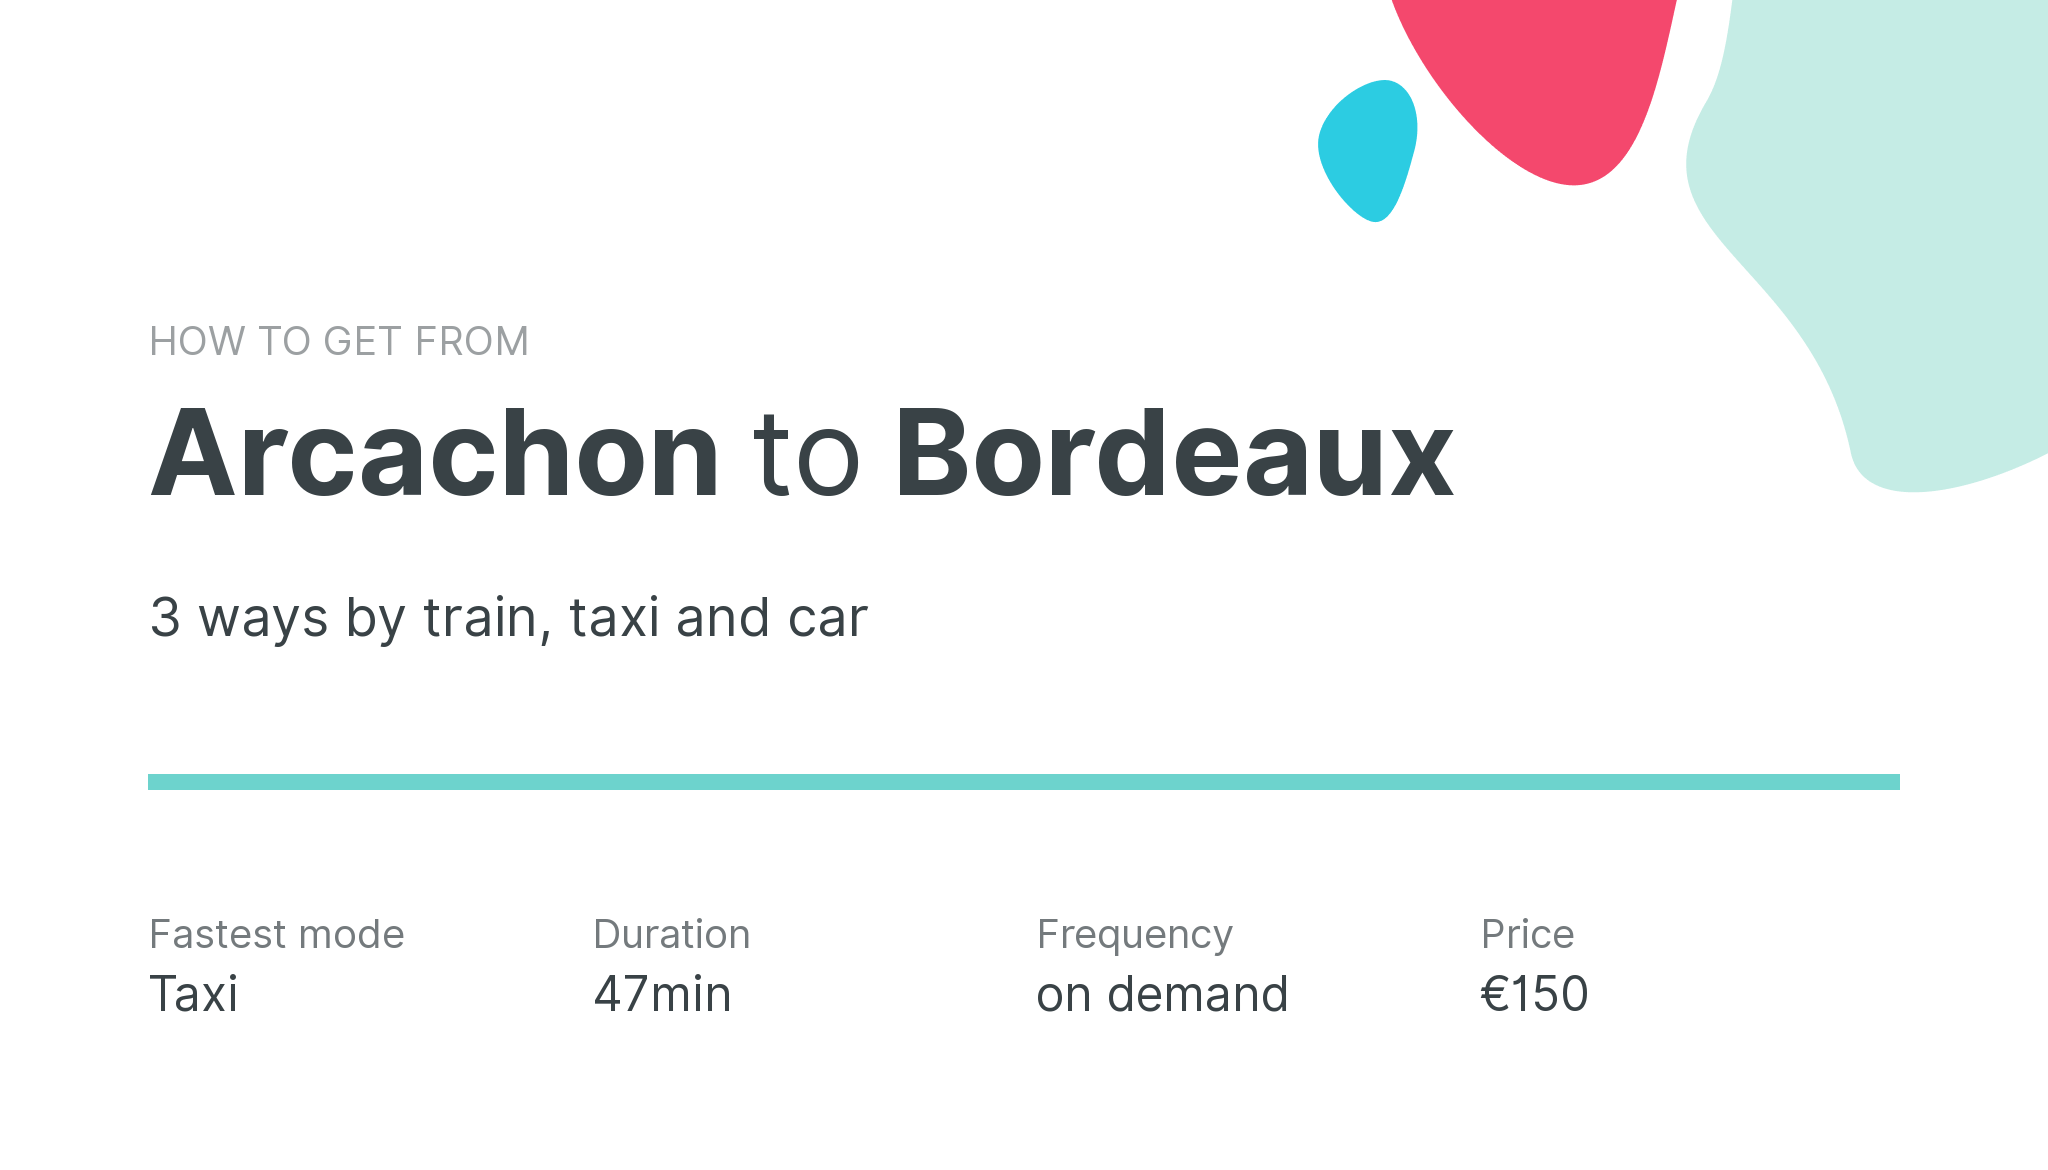 How do I get from Arcachon to Bordeaux